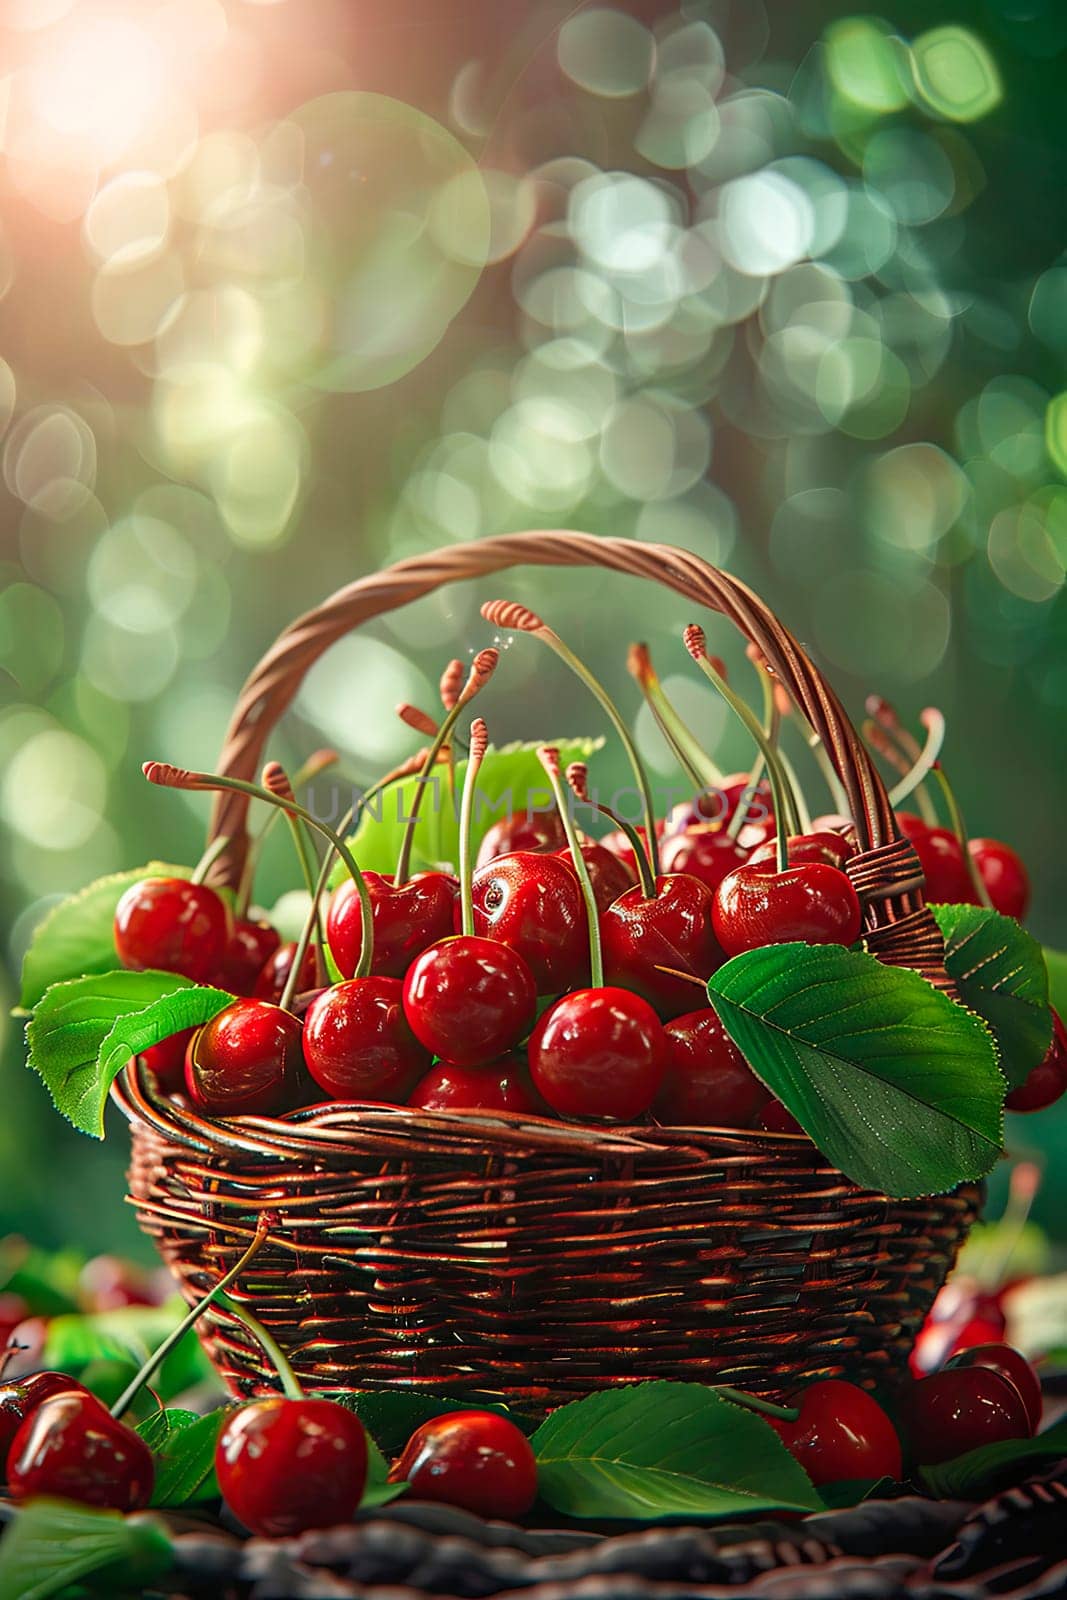 cherry in a basket in the garden. selective focus. food.